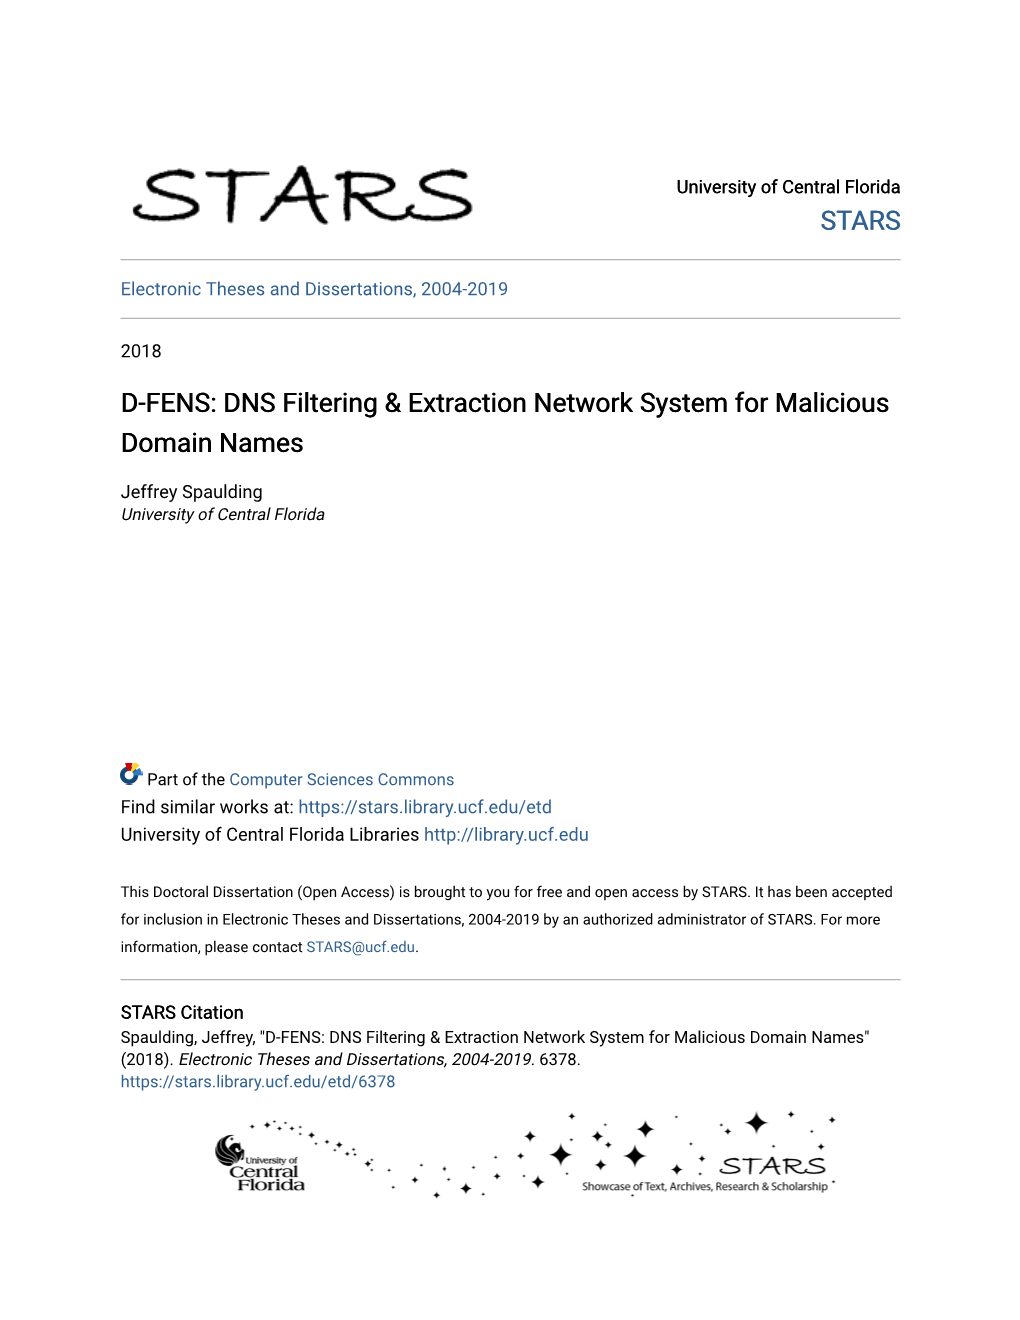 D-FENS: DNS Filtering & Extraction Network System for Malicious Domain Names